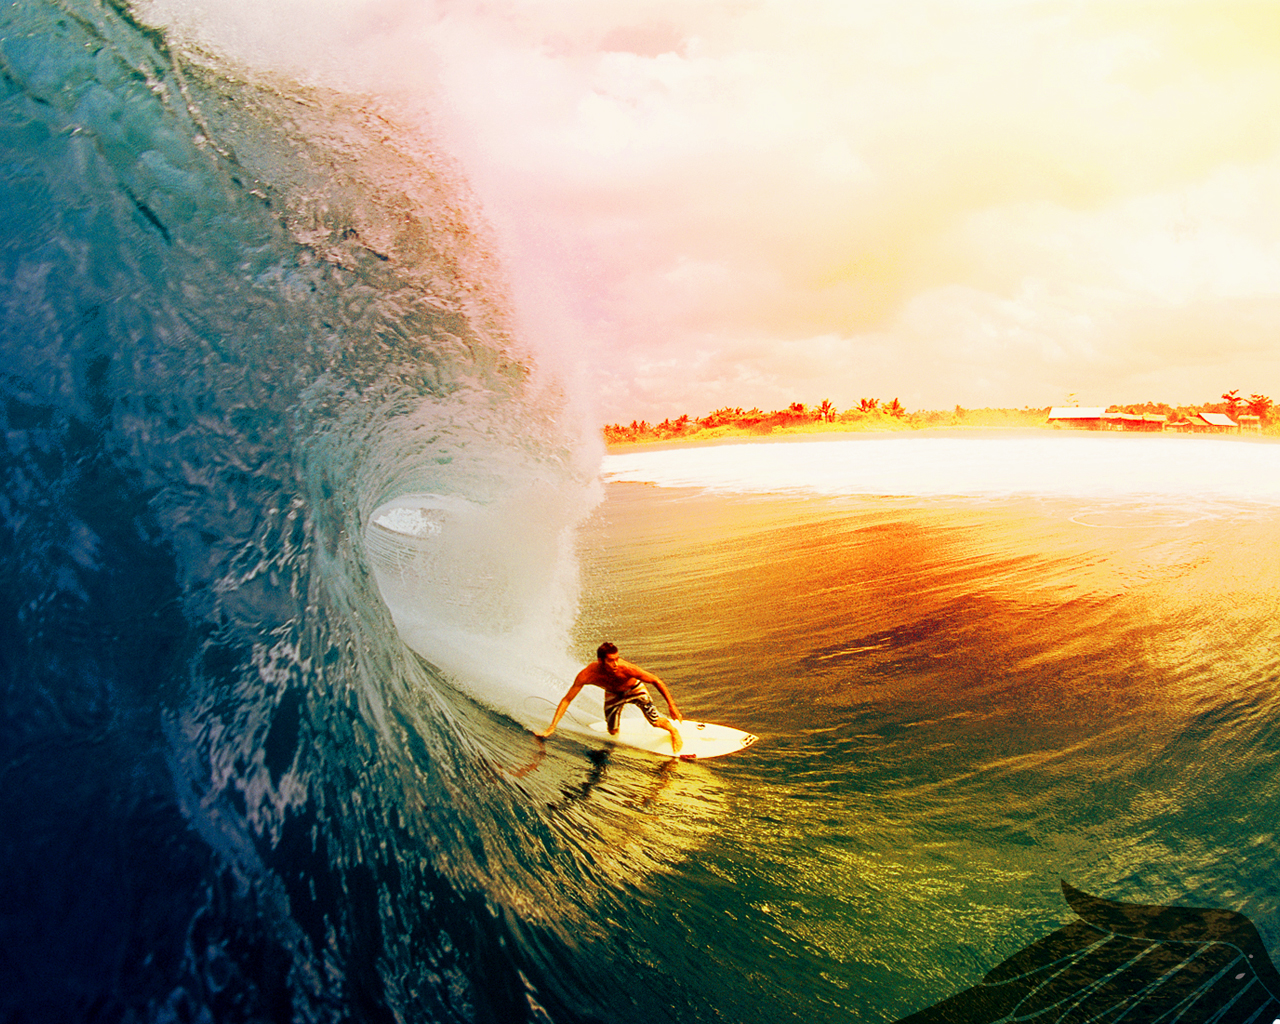 Wallpaper Wednesday  October 02  Surfs Up  We Travel and Blog